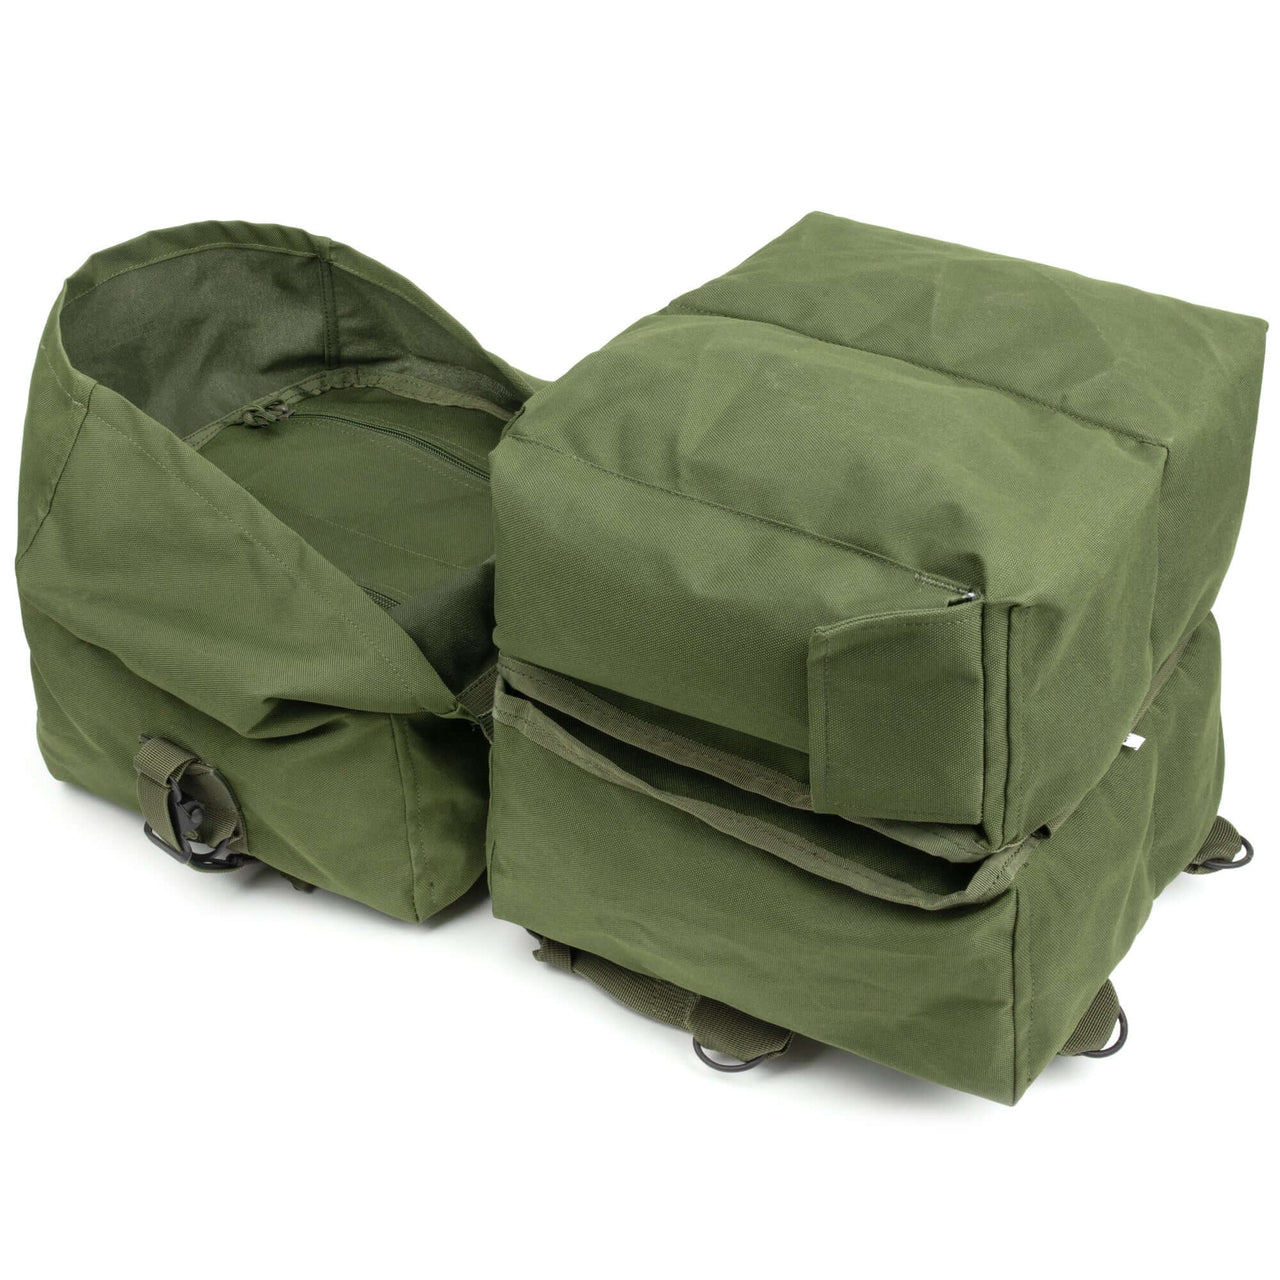 M-17 Medic Bag Complete Field First-Aid Kit